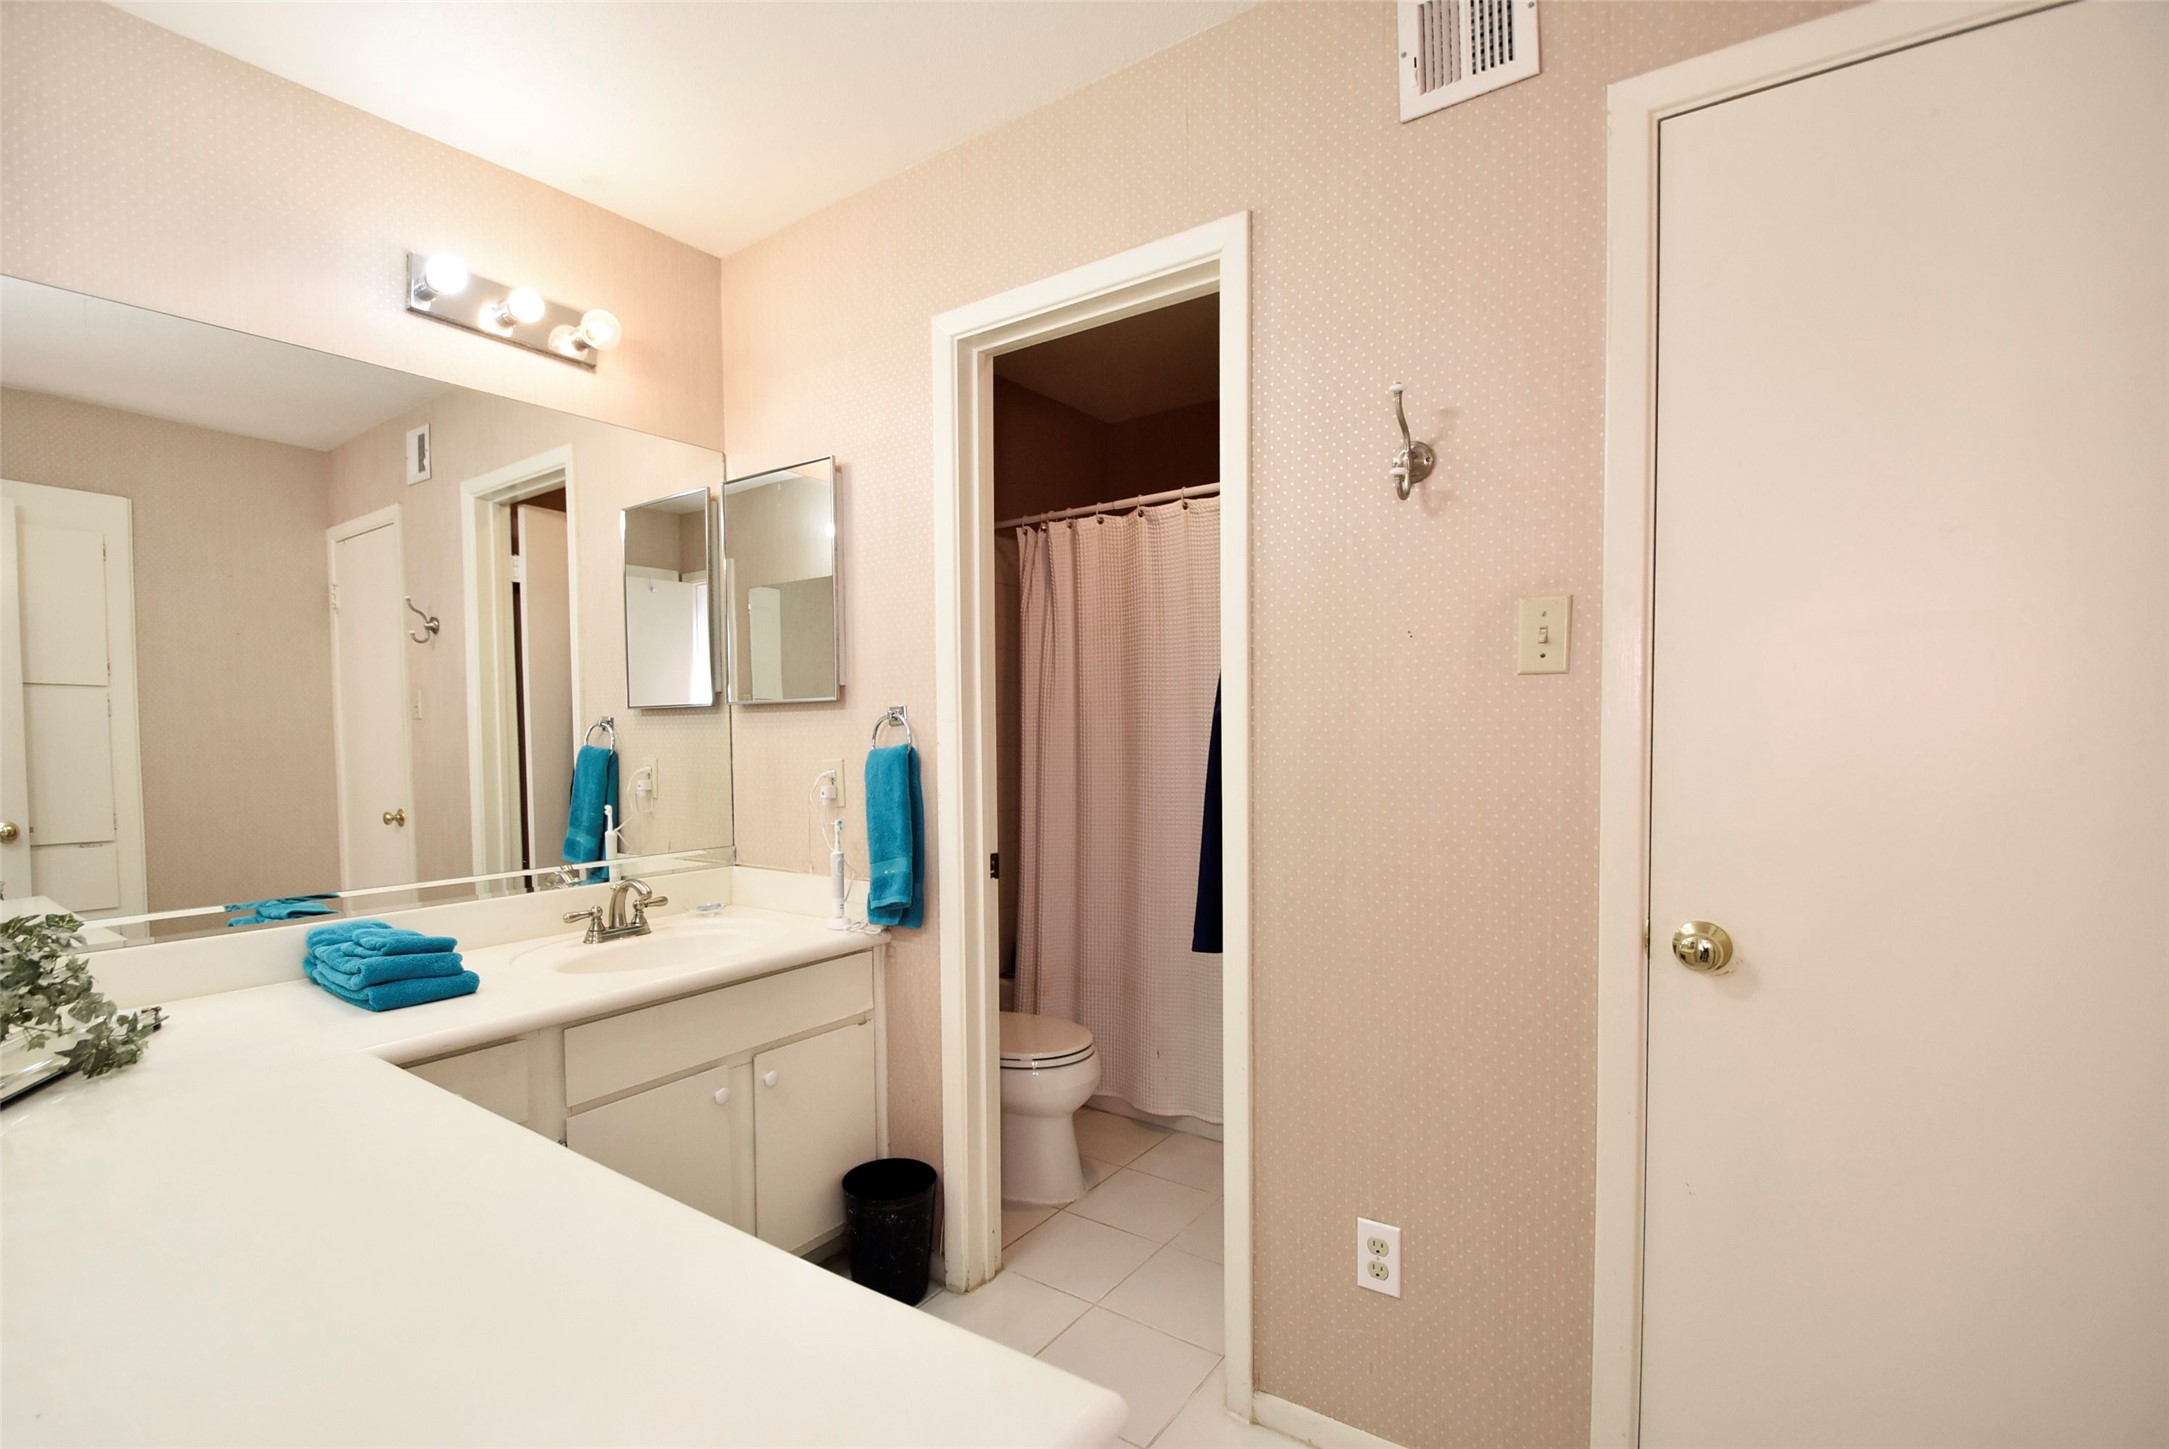 This bedroom has an ensuite bath with a large vanity area and tub/shower.